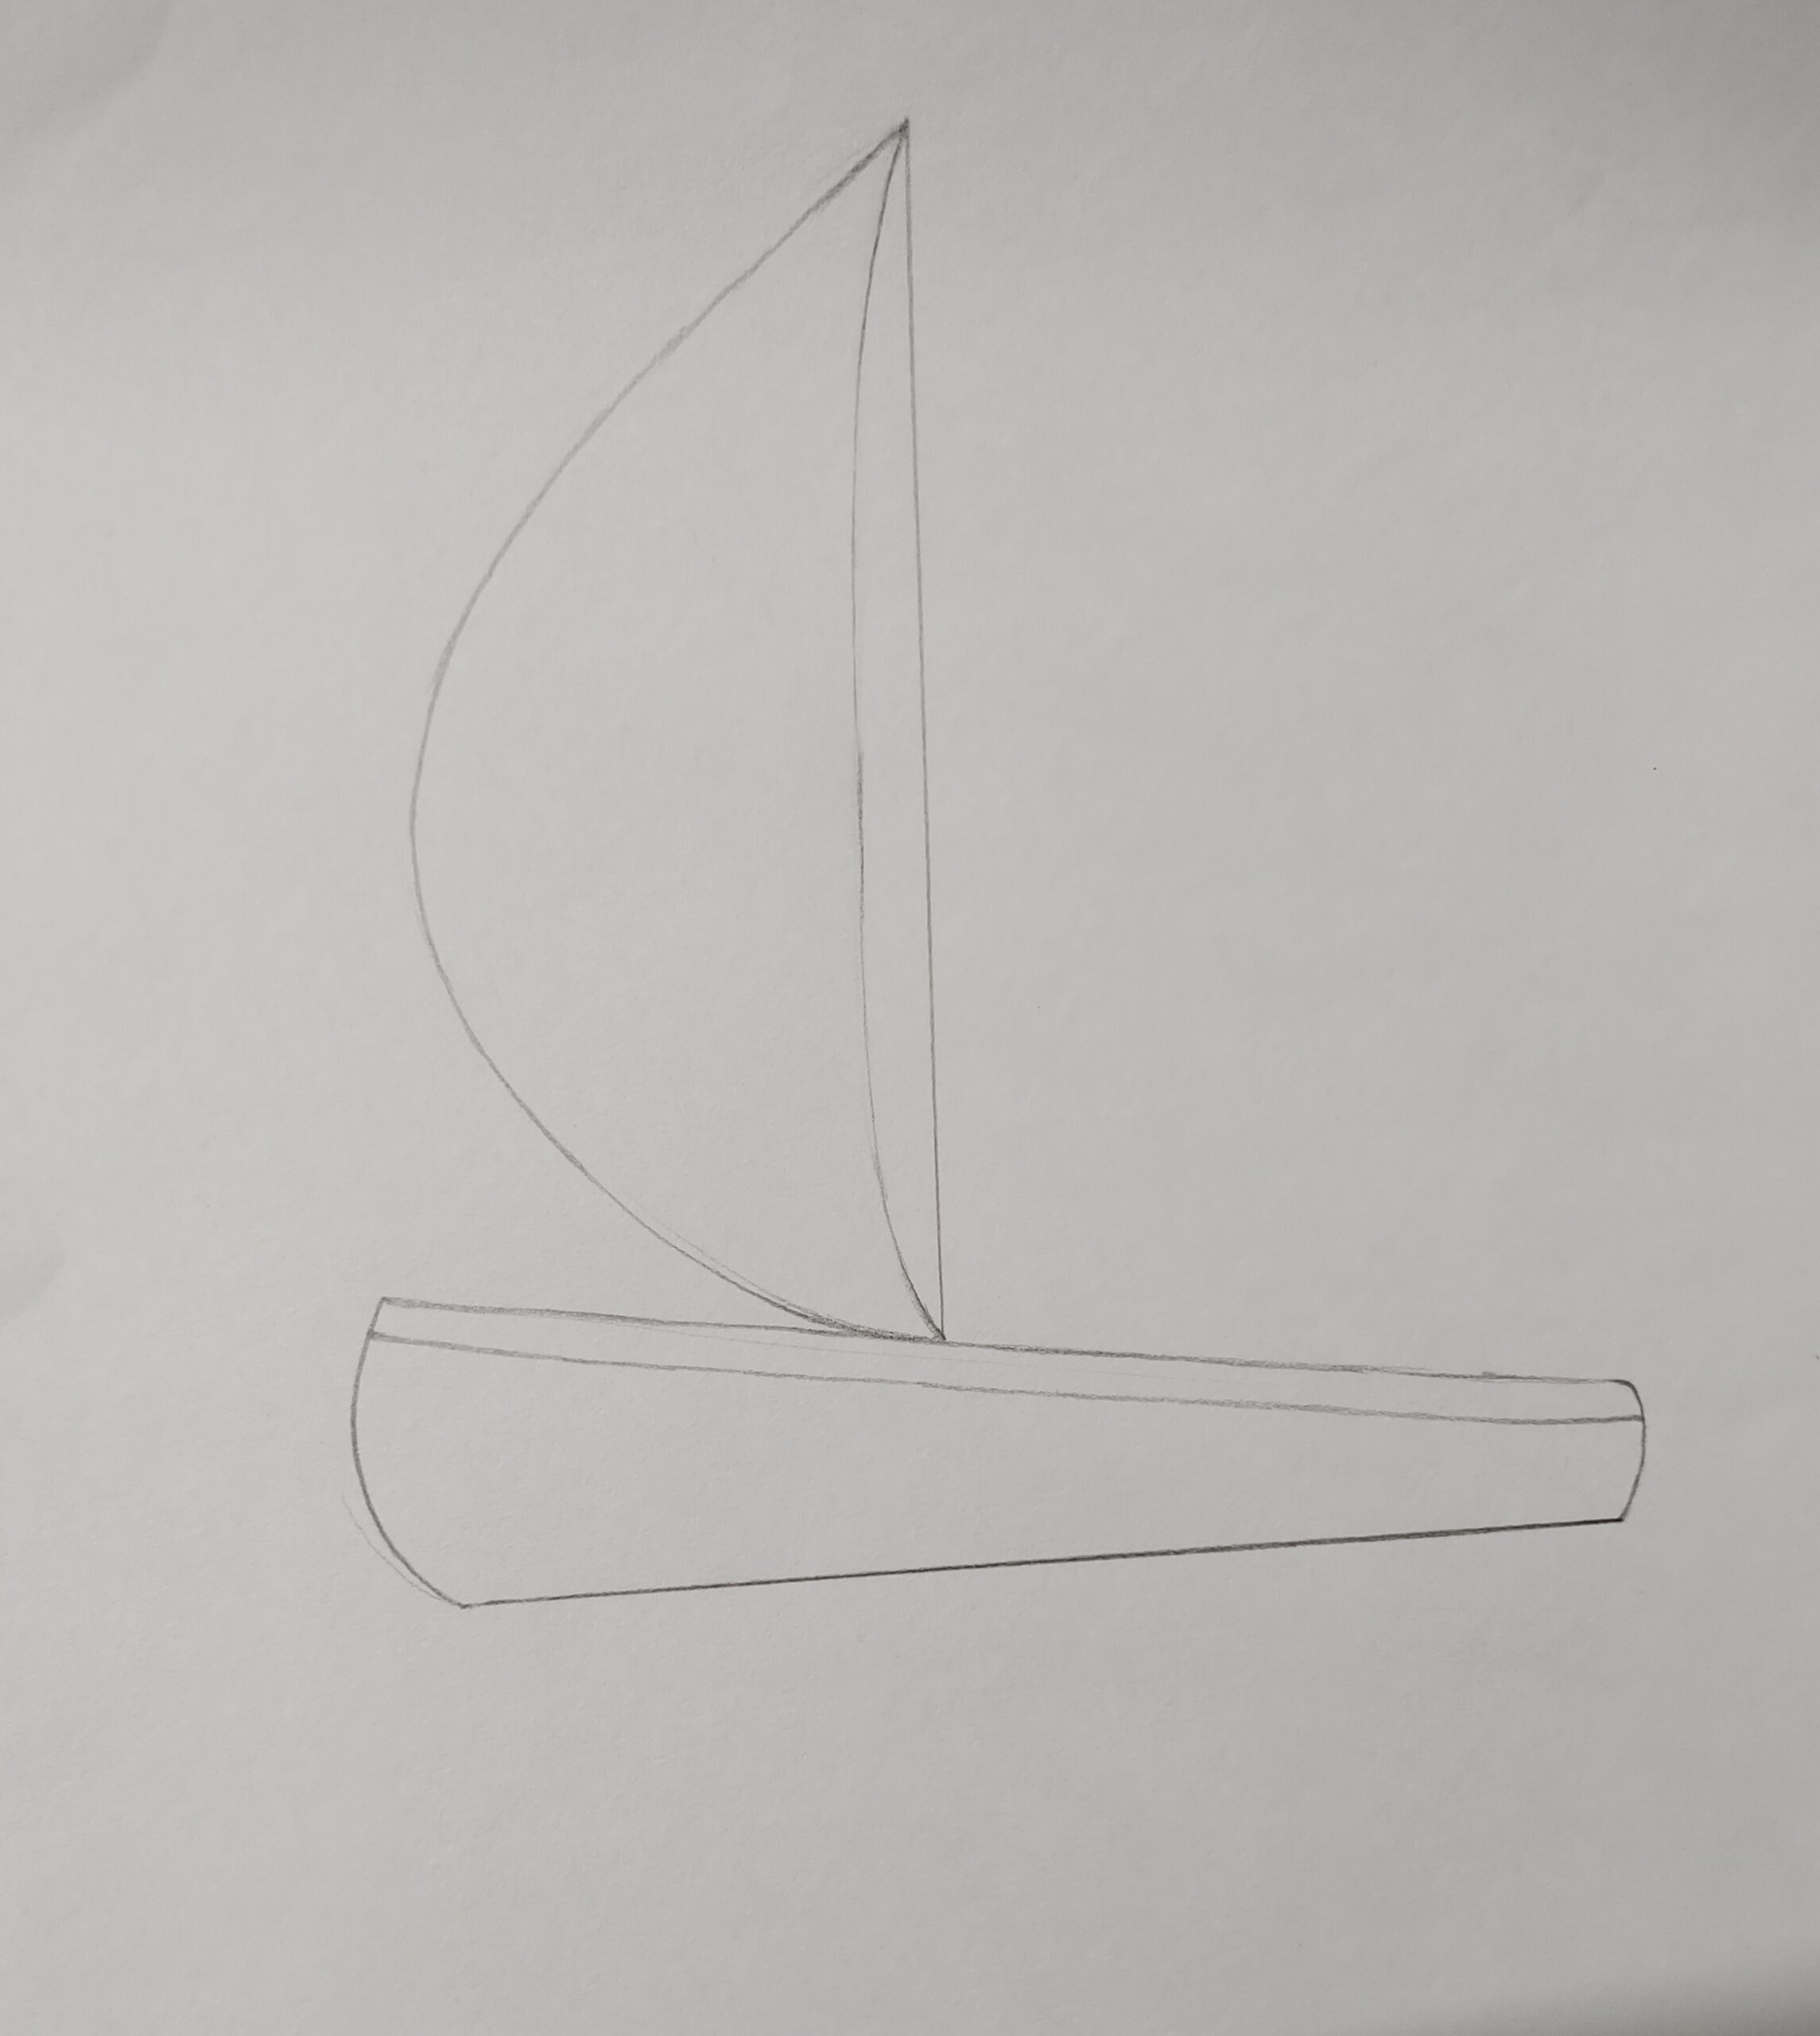 Sailboat Drawing Sketch Vector Images over 1800